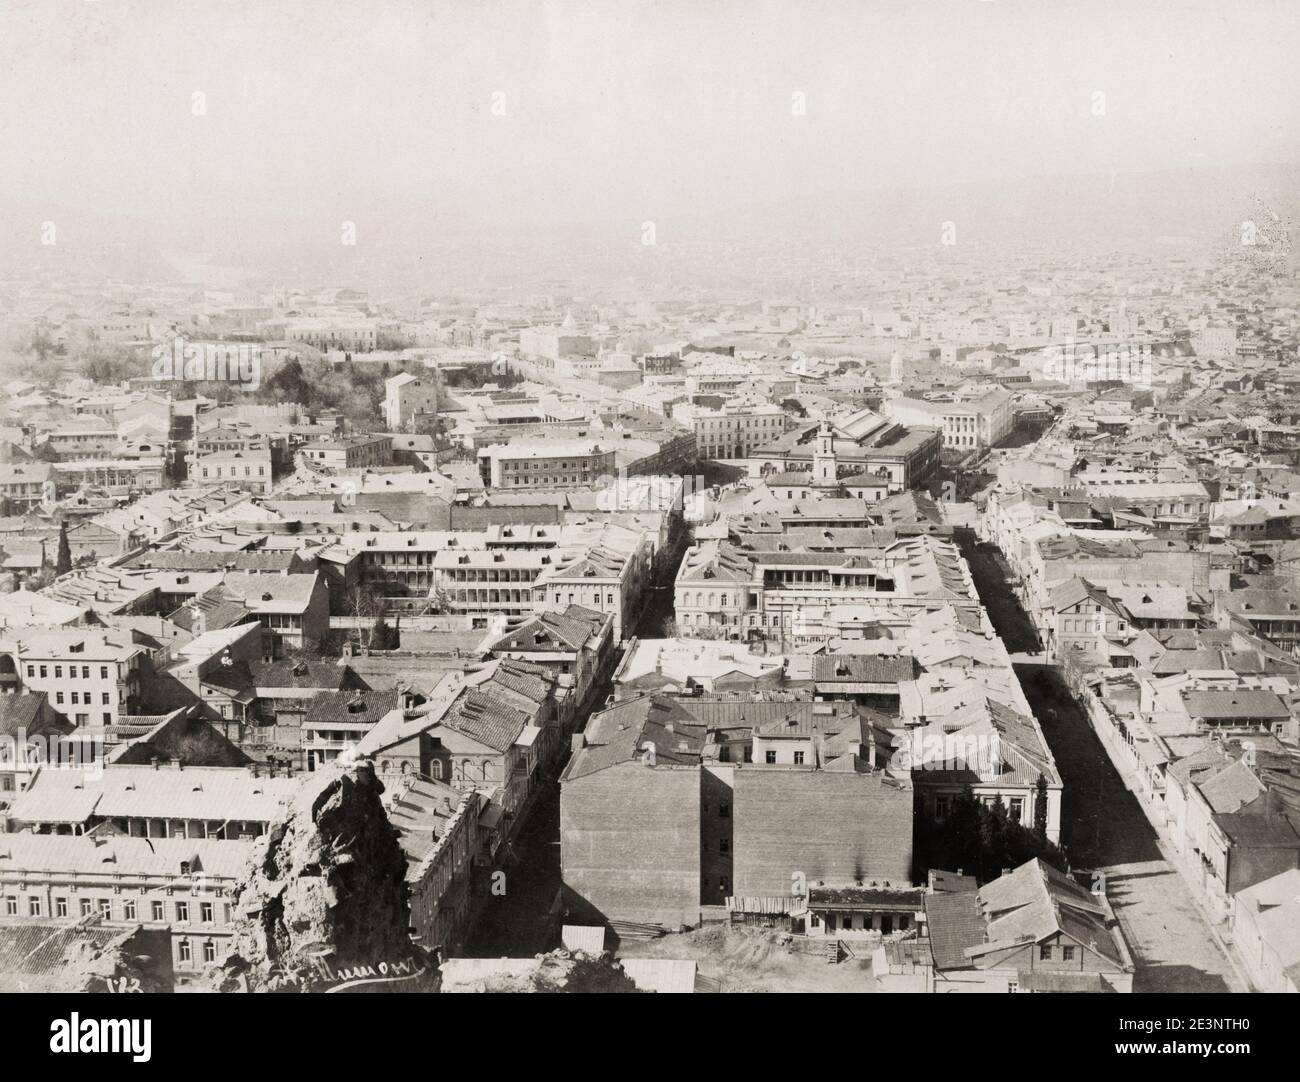 Vintage 19th century photograph: Baku, the capital and commercial hub of Azerbaijan, is a low-lying city with coastline along the Caspian Sea. It's famed for its medieval walled old city, which contains the Palace of the Shirvanshahs, a vast royal complex, and the iconic stone Maiden Tower. Stock Photo